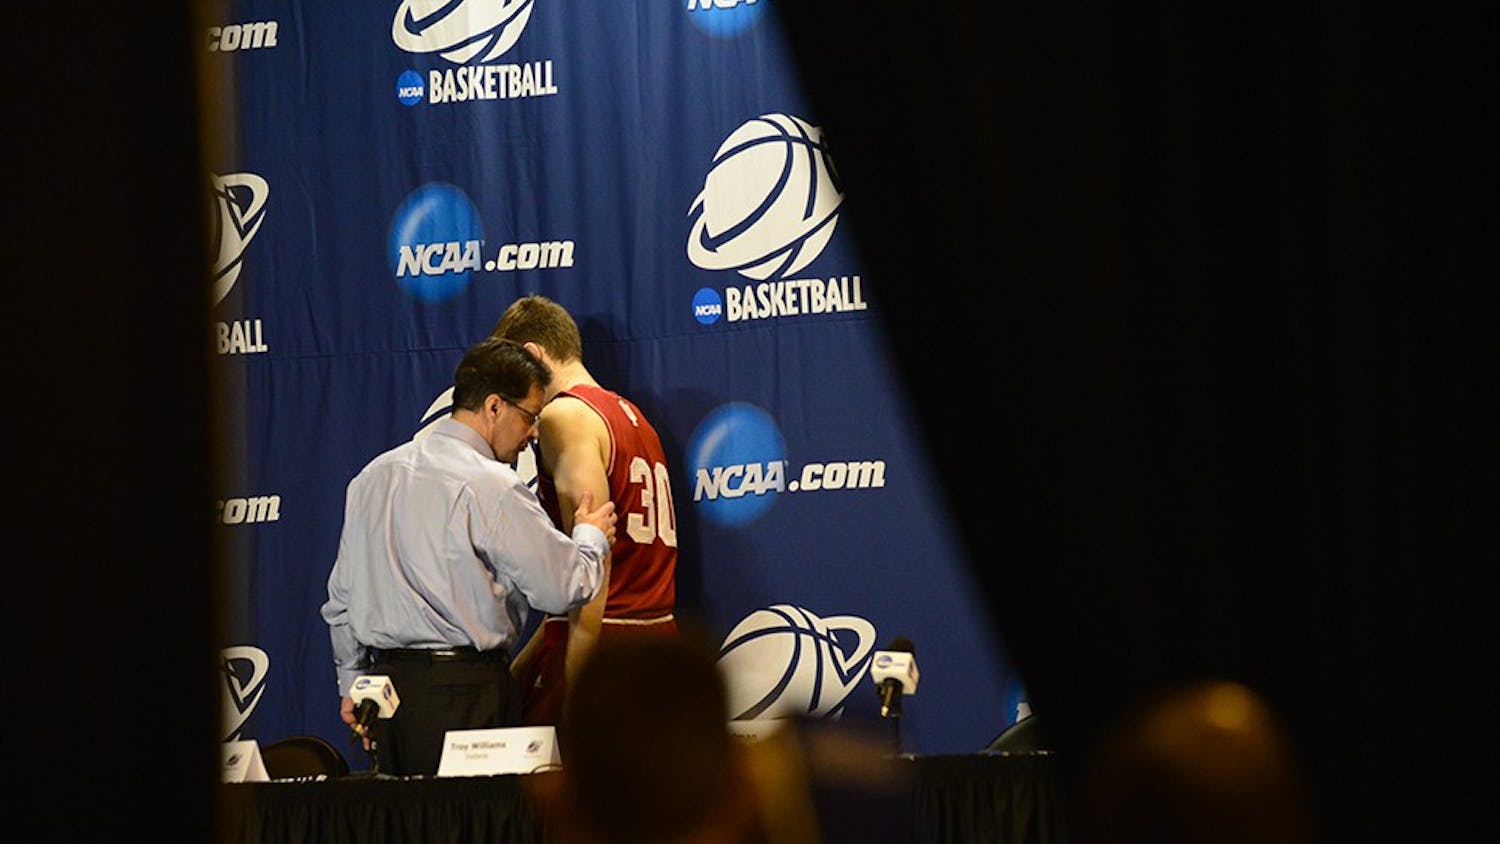 Head coach Tom Crean and sophomore Collin Hartman leave the stage after IU's post game press conference following the 81-76 loss to Wichita State on Friday at the CenturyLink Center in Omaha, Neb.